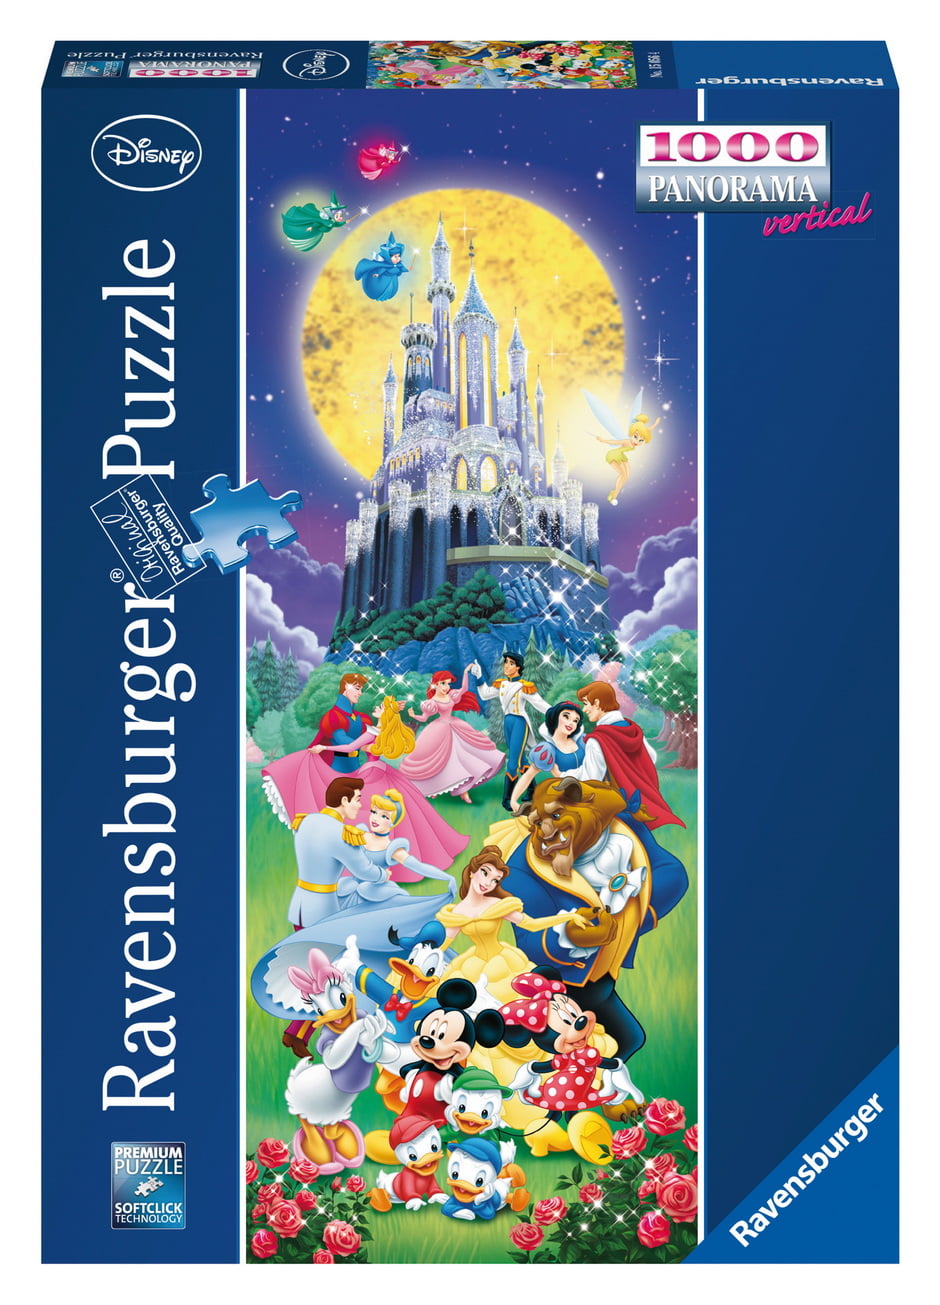 very much Skilled in spite of دوق حطام سفينة بصمت ravensburger puzzle panorama disney - nooutfit.com